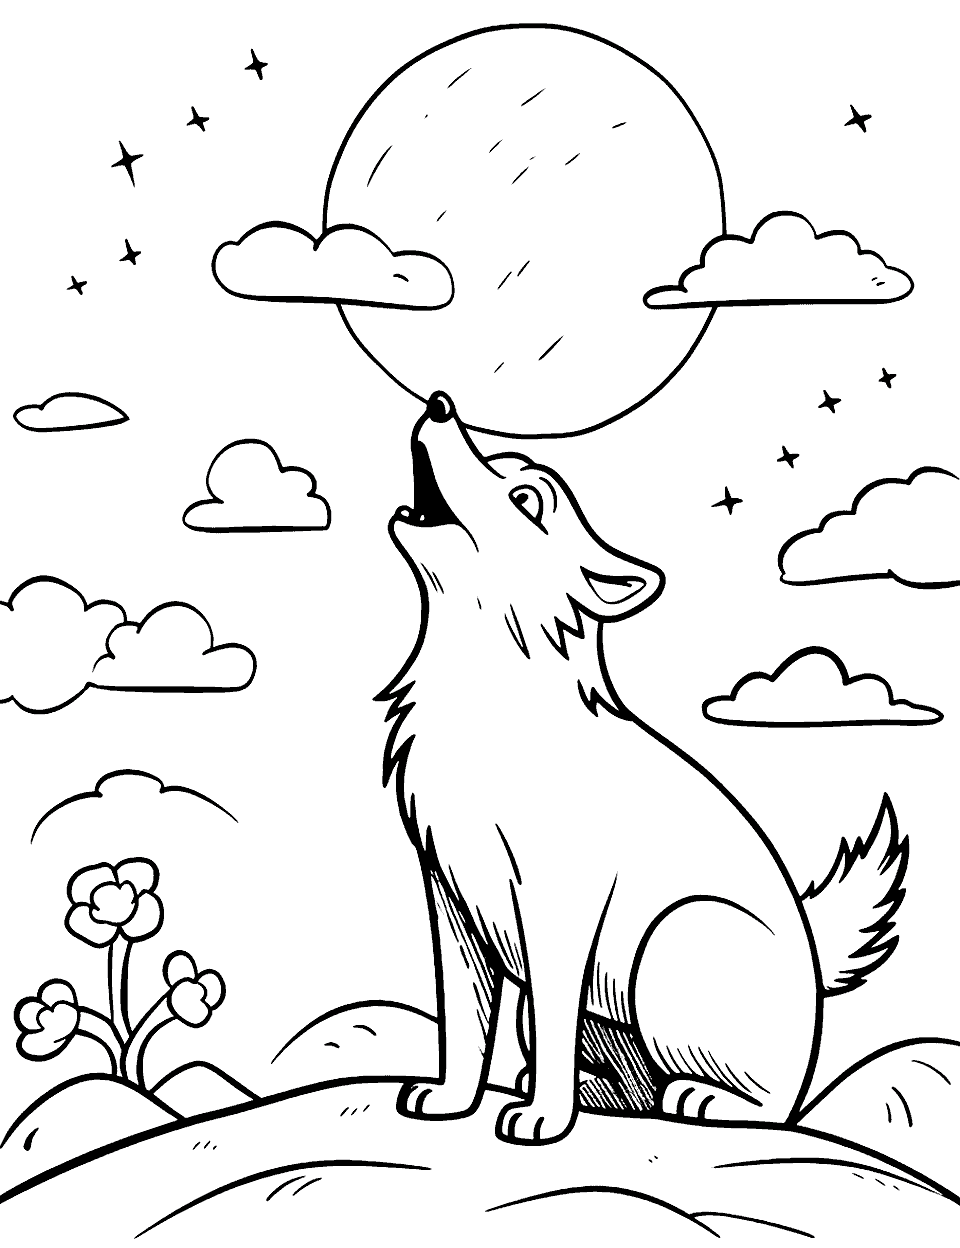 Wolf Howling at the Moon Coloring Page - A lone wolf howling at a full moon.